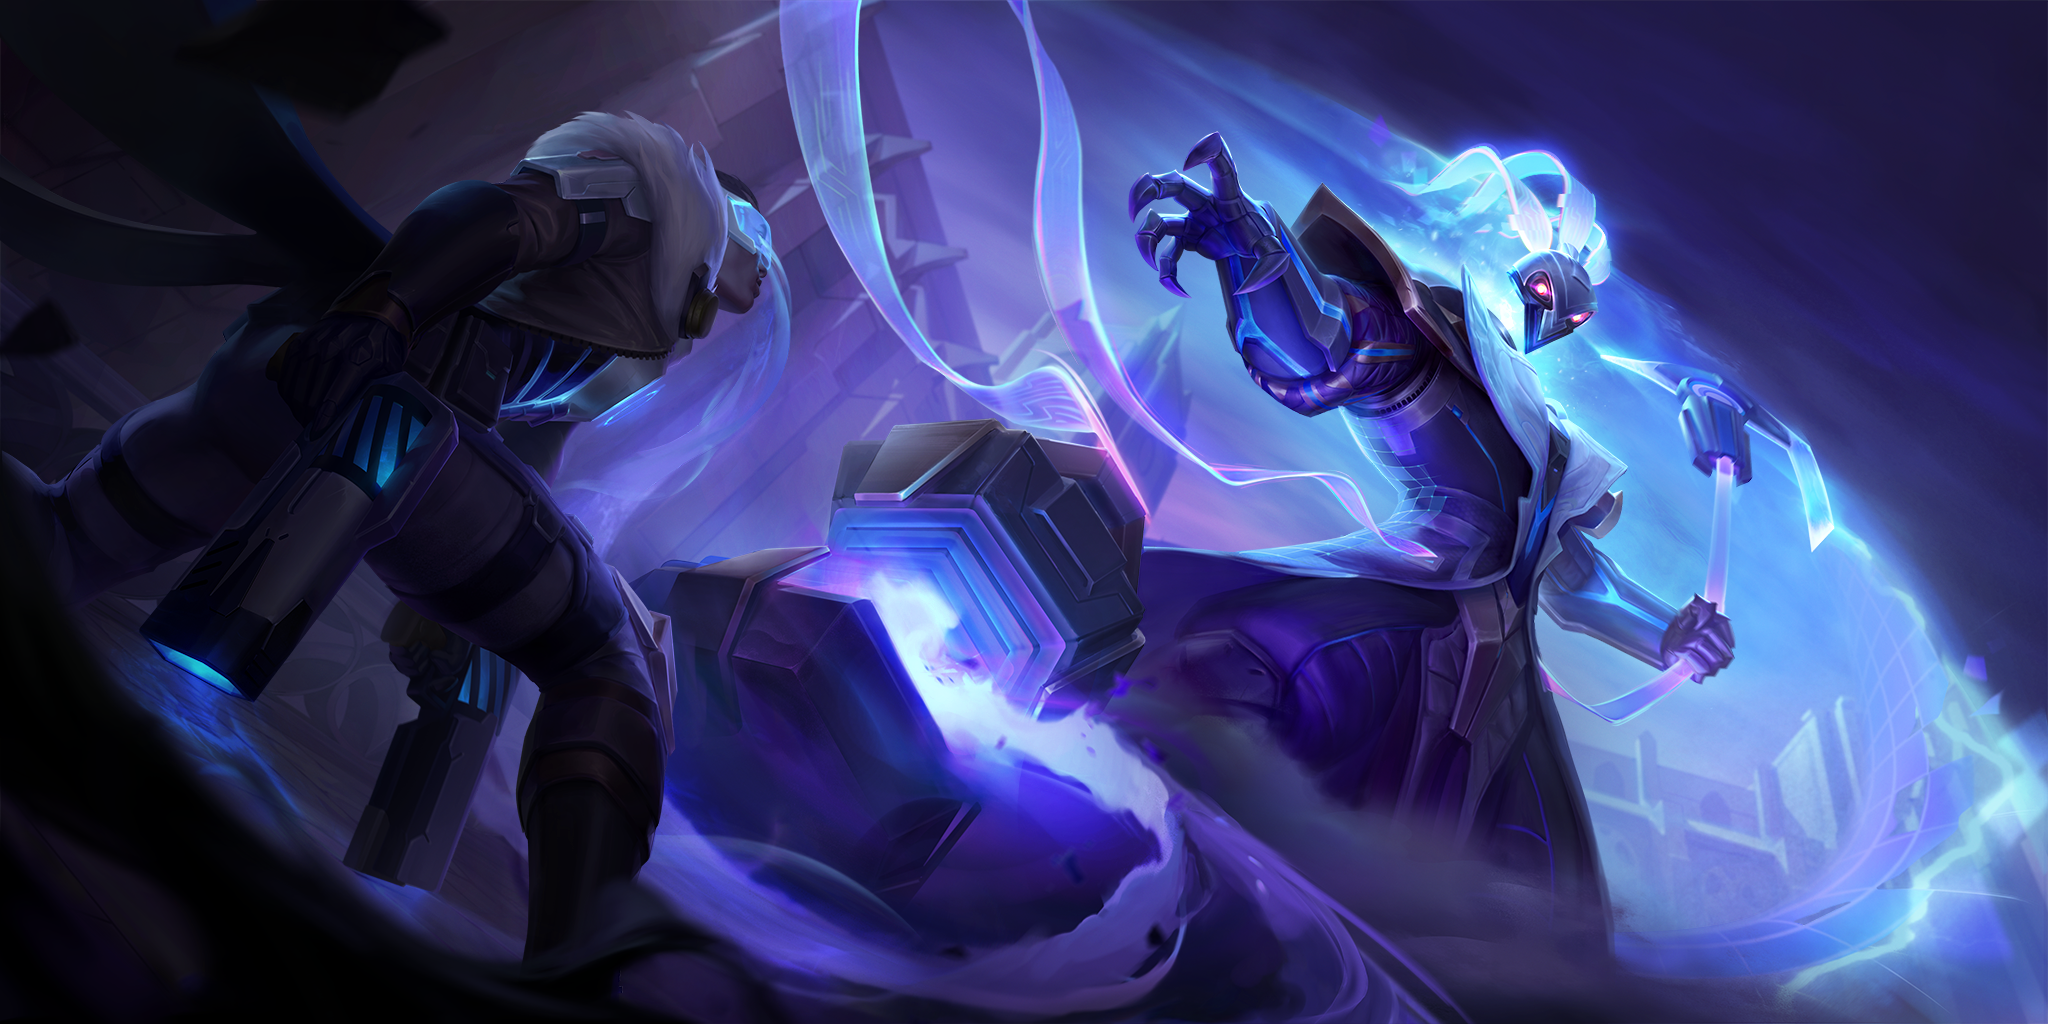 Pulsefire Thresh looms over an exhausted Pulsefire Lucien.